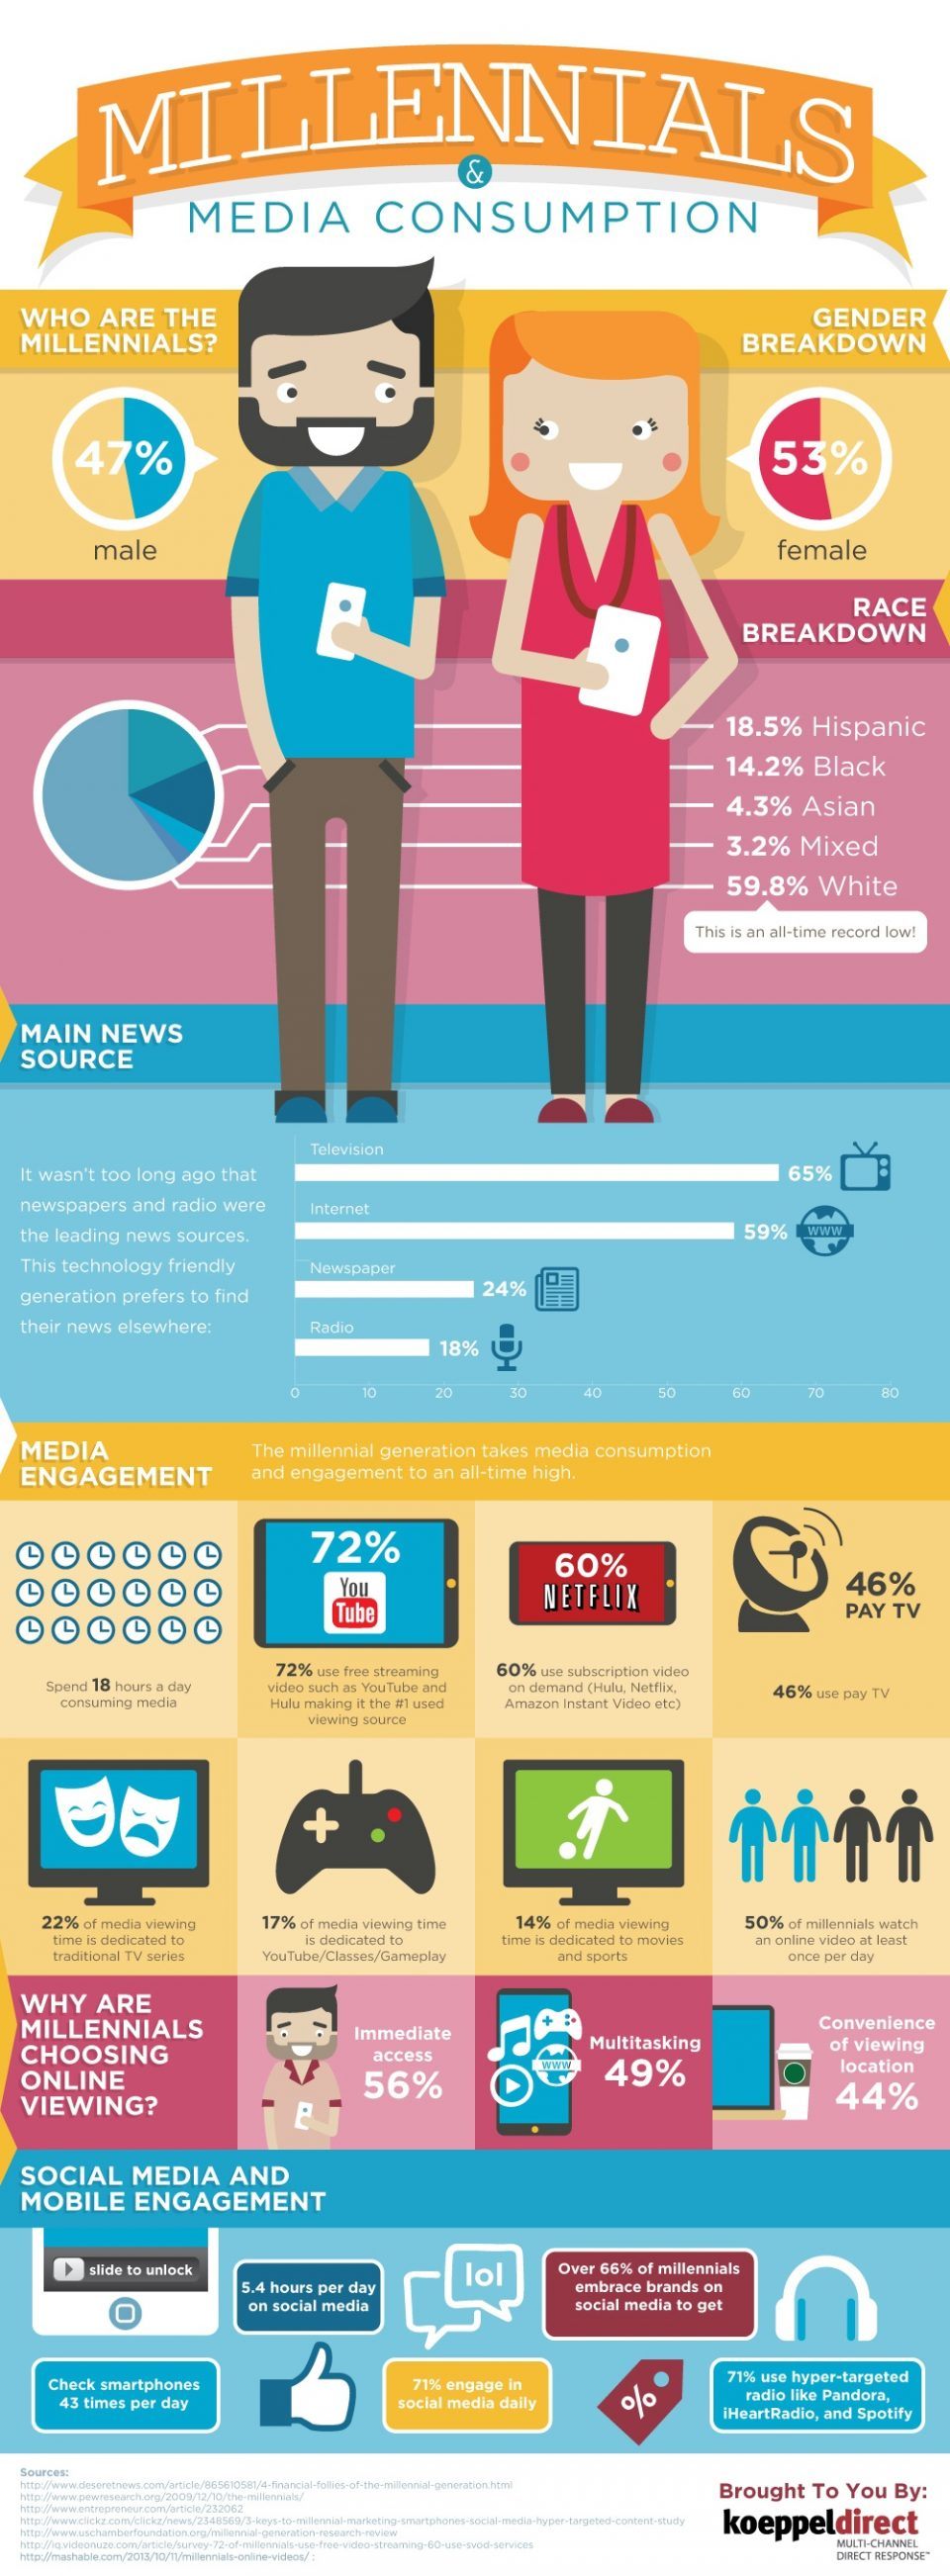 Millennials and Media Consumption Infographic